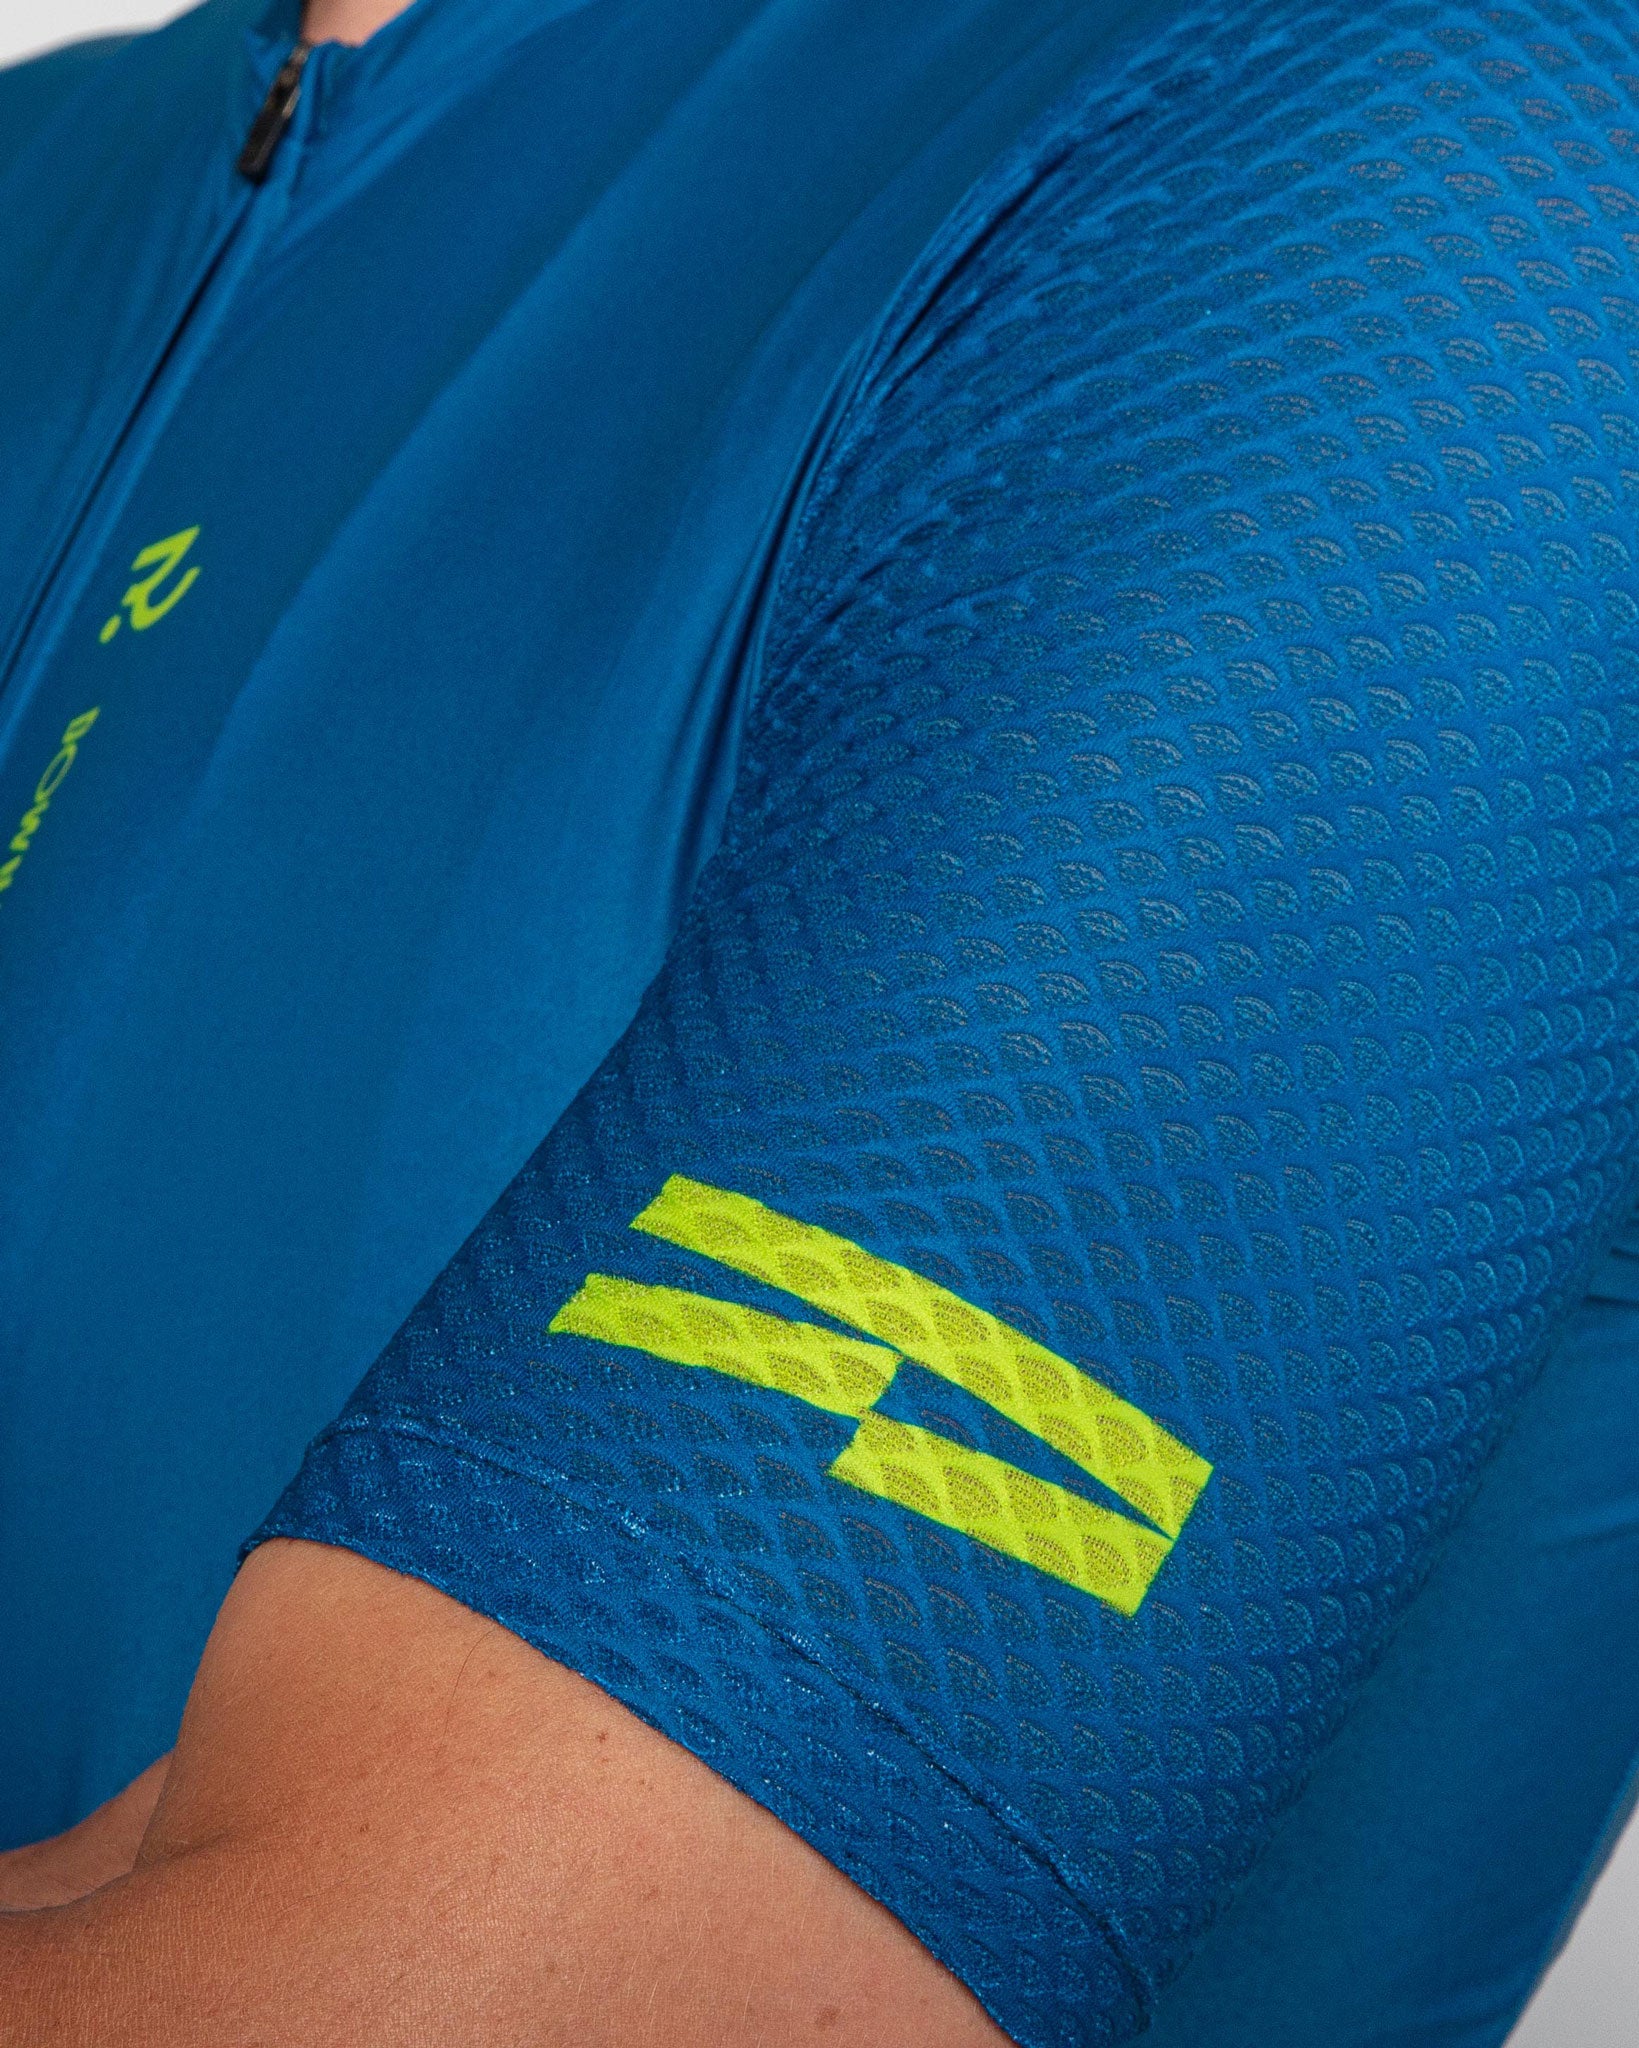 sleeve close up of Men's Century Jersey Teal and Green